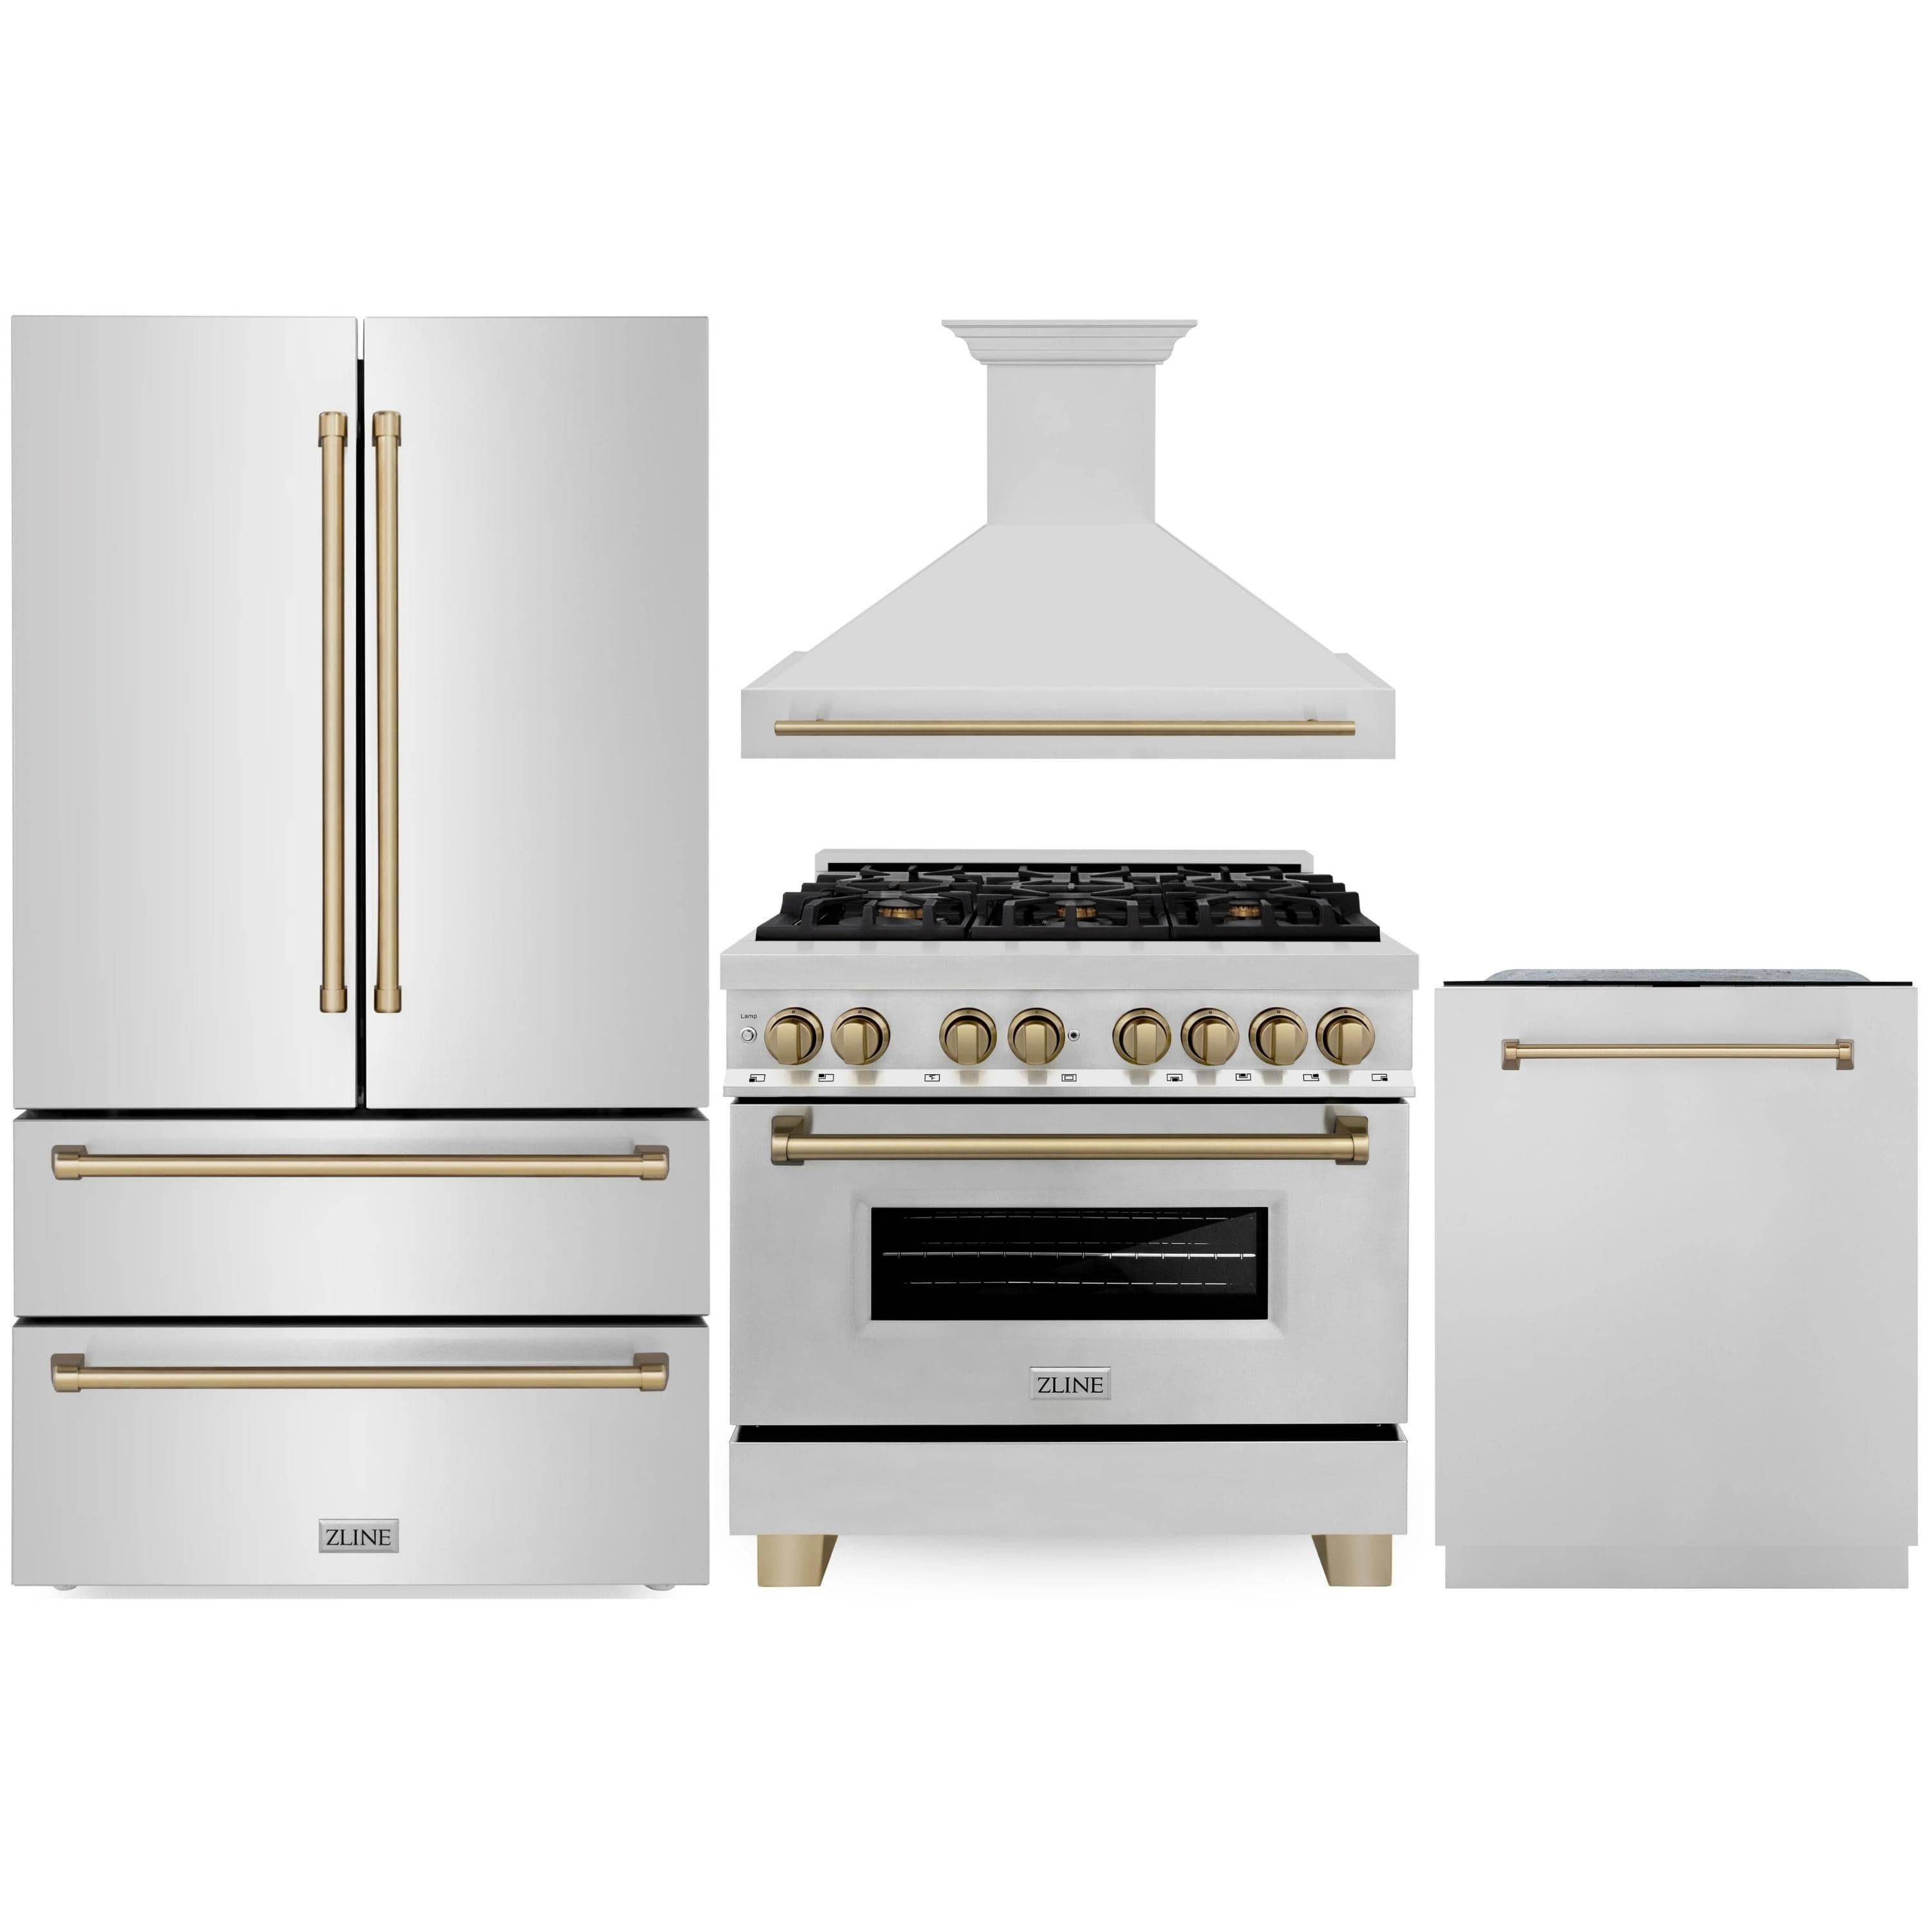 ZLINE Autograph Edition 4-Piece Appliance Package - 36-Inch Dual Fuel Range, Refrigerator, Wall Mounted Range Hood, and 24-Inch Tall Tub Dishwasher in Stainless Steel with Champagne Bronze Trim (4KAPR-RARHDWM36-CB)